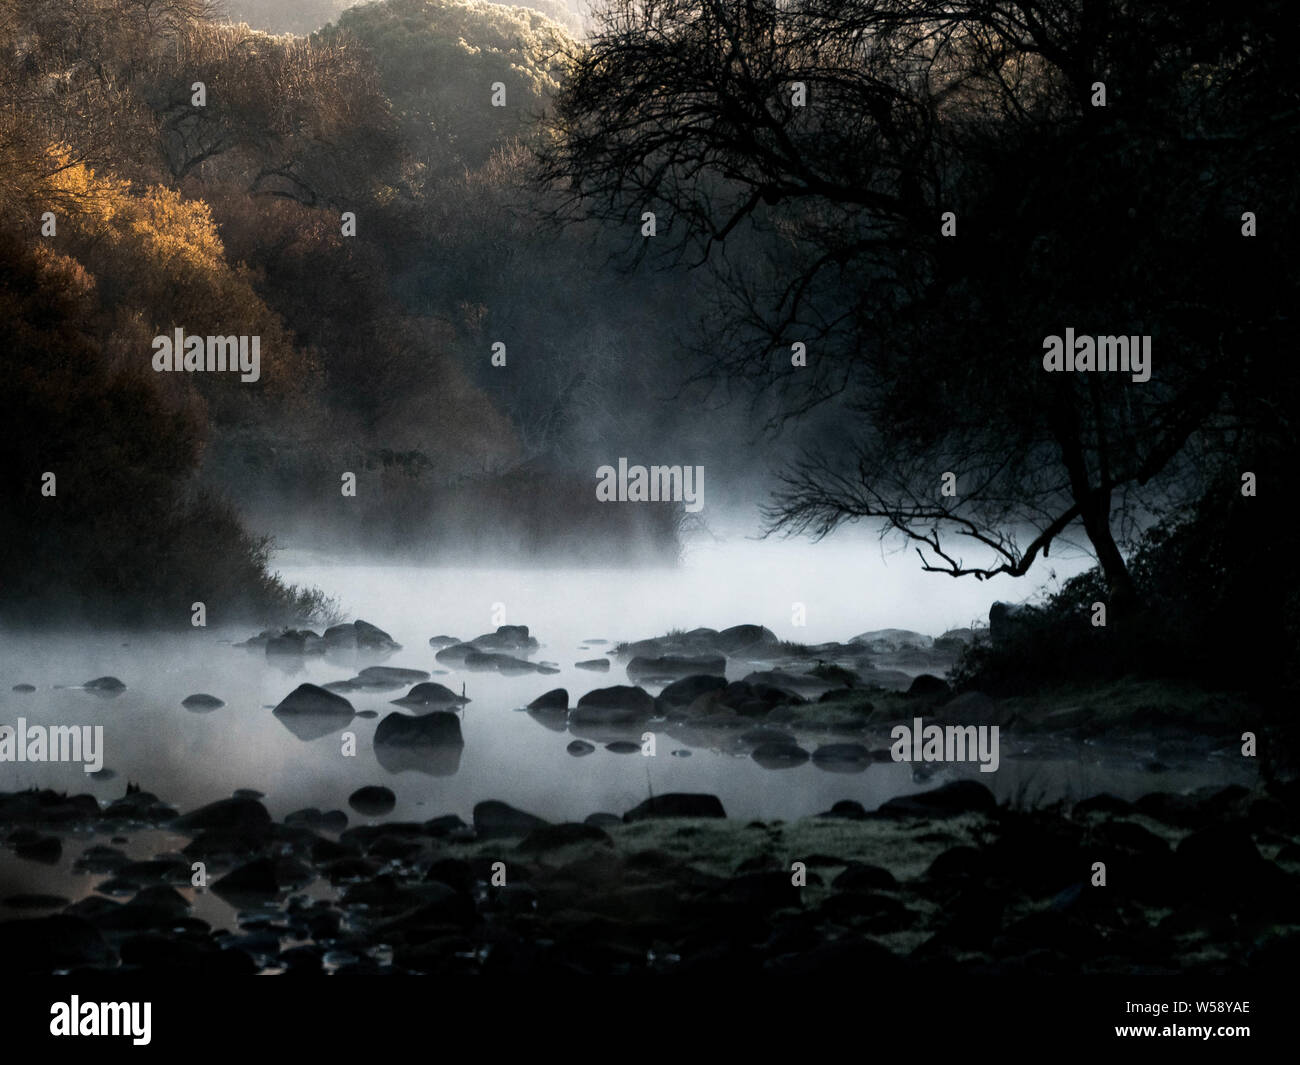 River in a forest with mist and rocks. RÃo en bosque con bruma y rocas Stock Photo